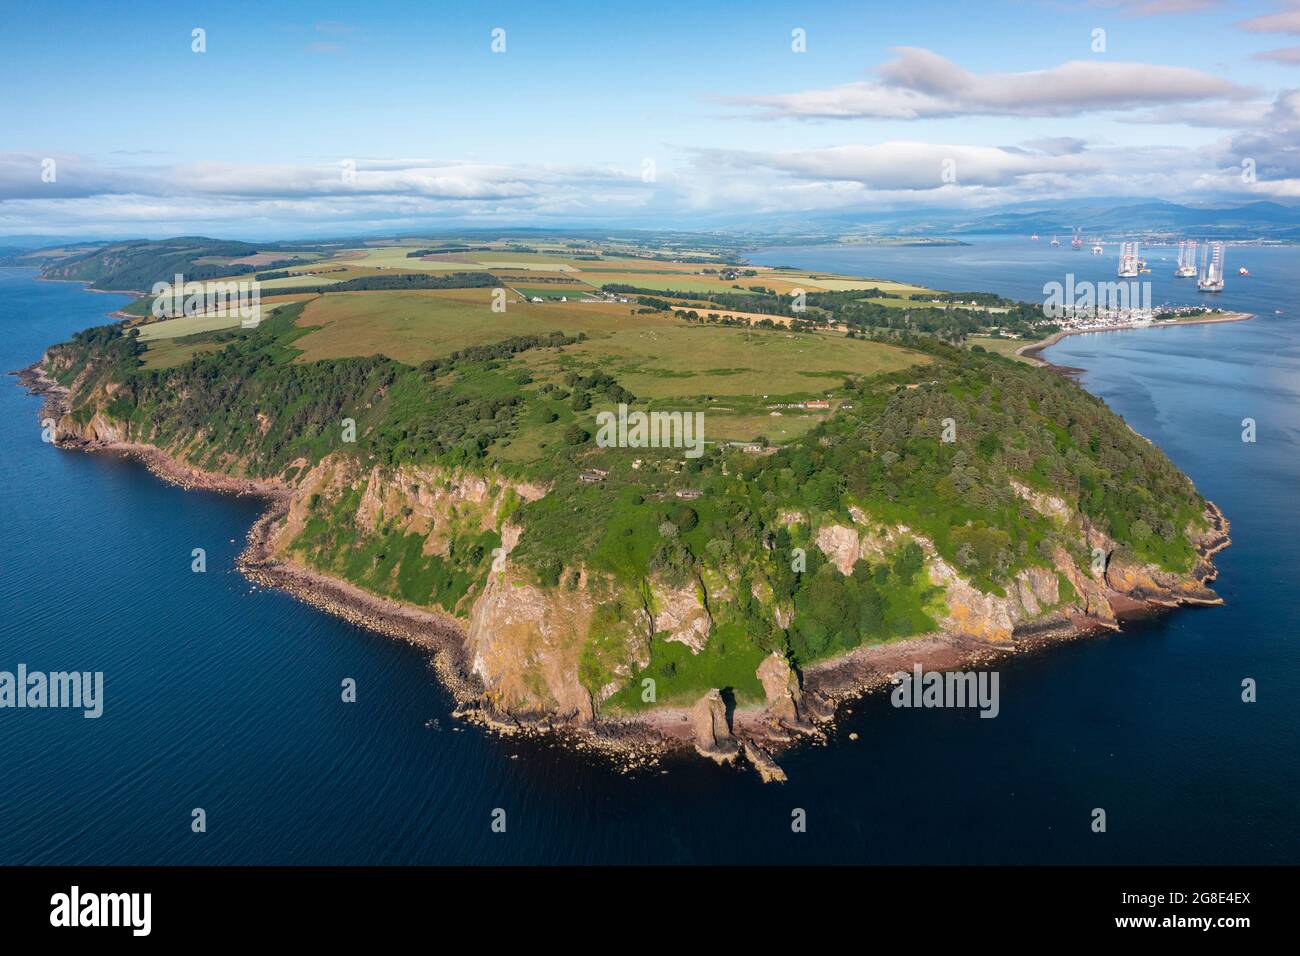 Aerial view from drone of Sutors of Cromarty headland at entrance to Cromarty firth in Ross and Cromarty, Scotland Uk Stock Photo